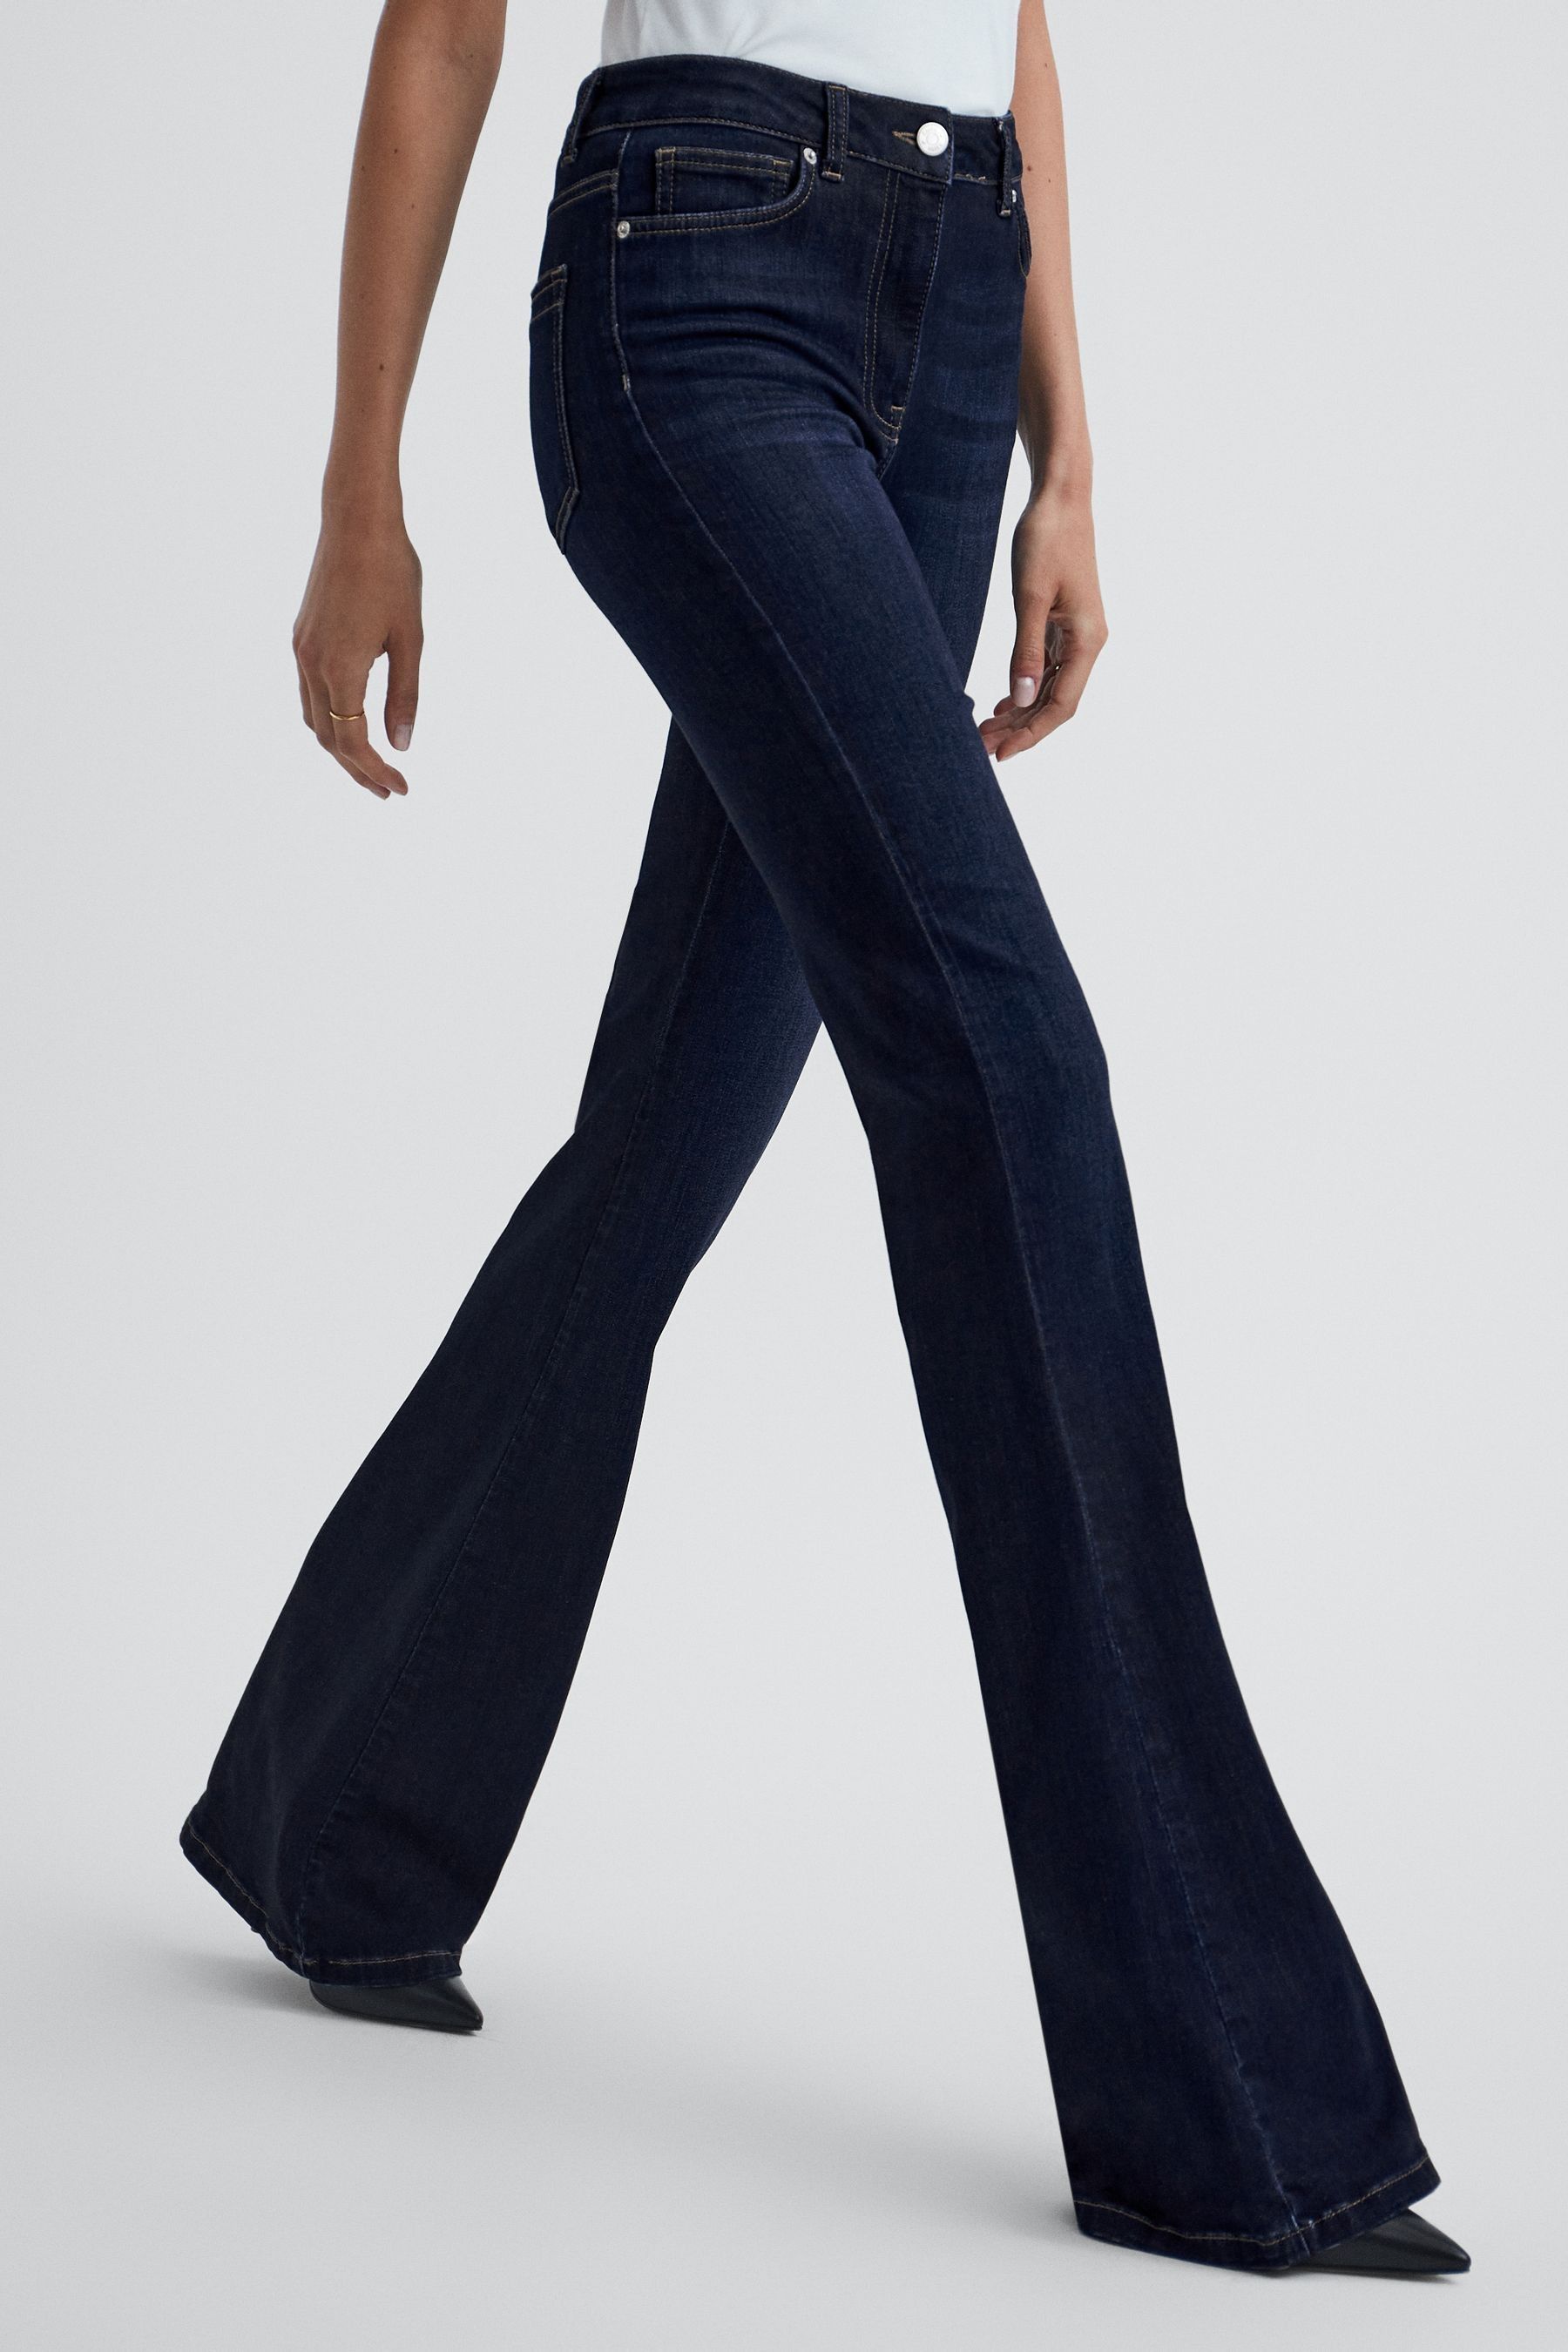 Buy Reiss Dark Indigo Beau High Rise Skinny Flared Jeans from the Next ...